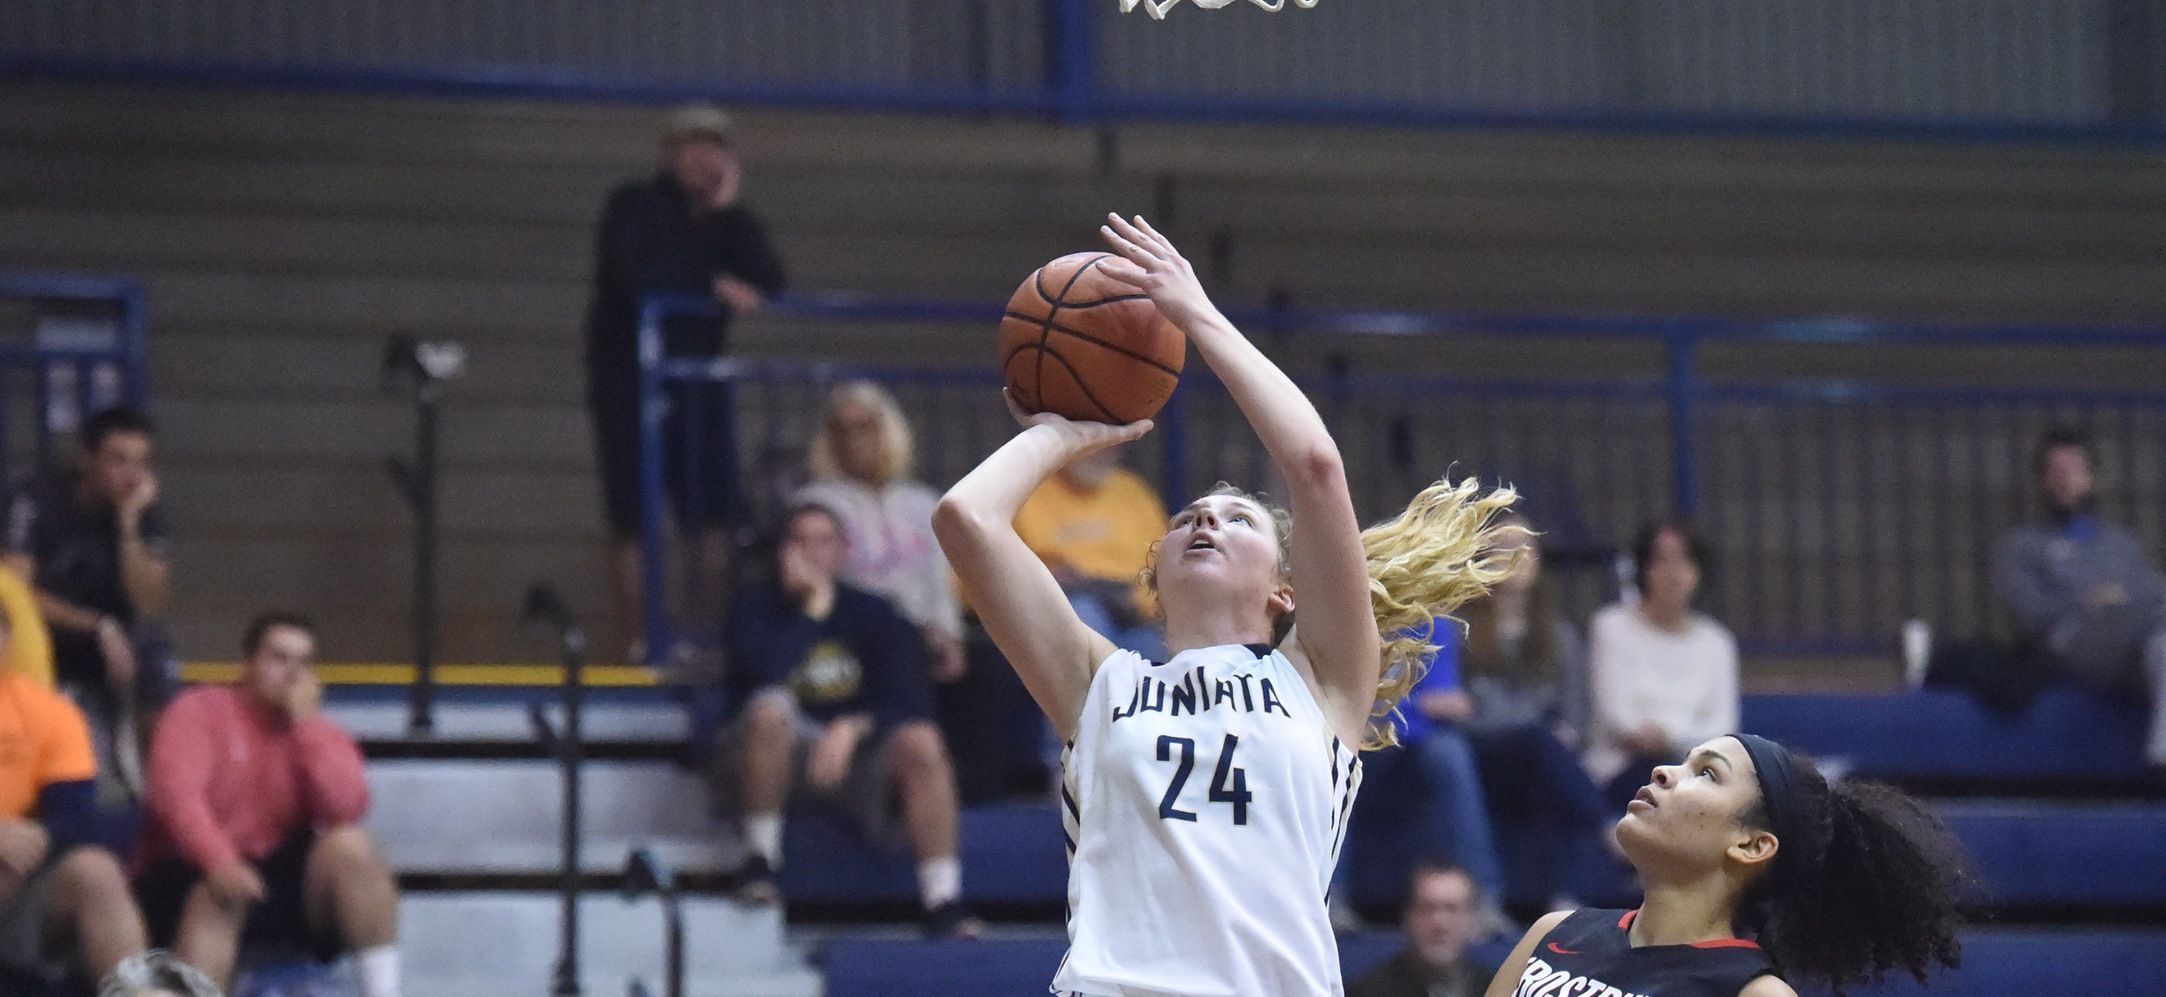 Morgan Instone was a bright spot for the Eagles as she scored an efficent 15 points.